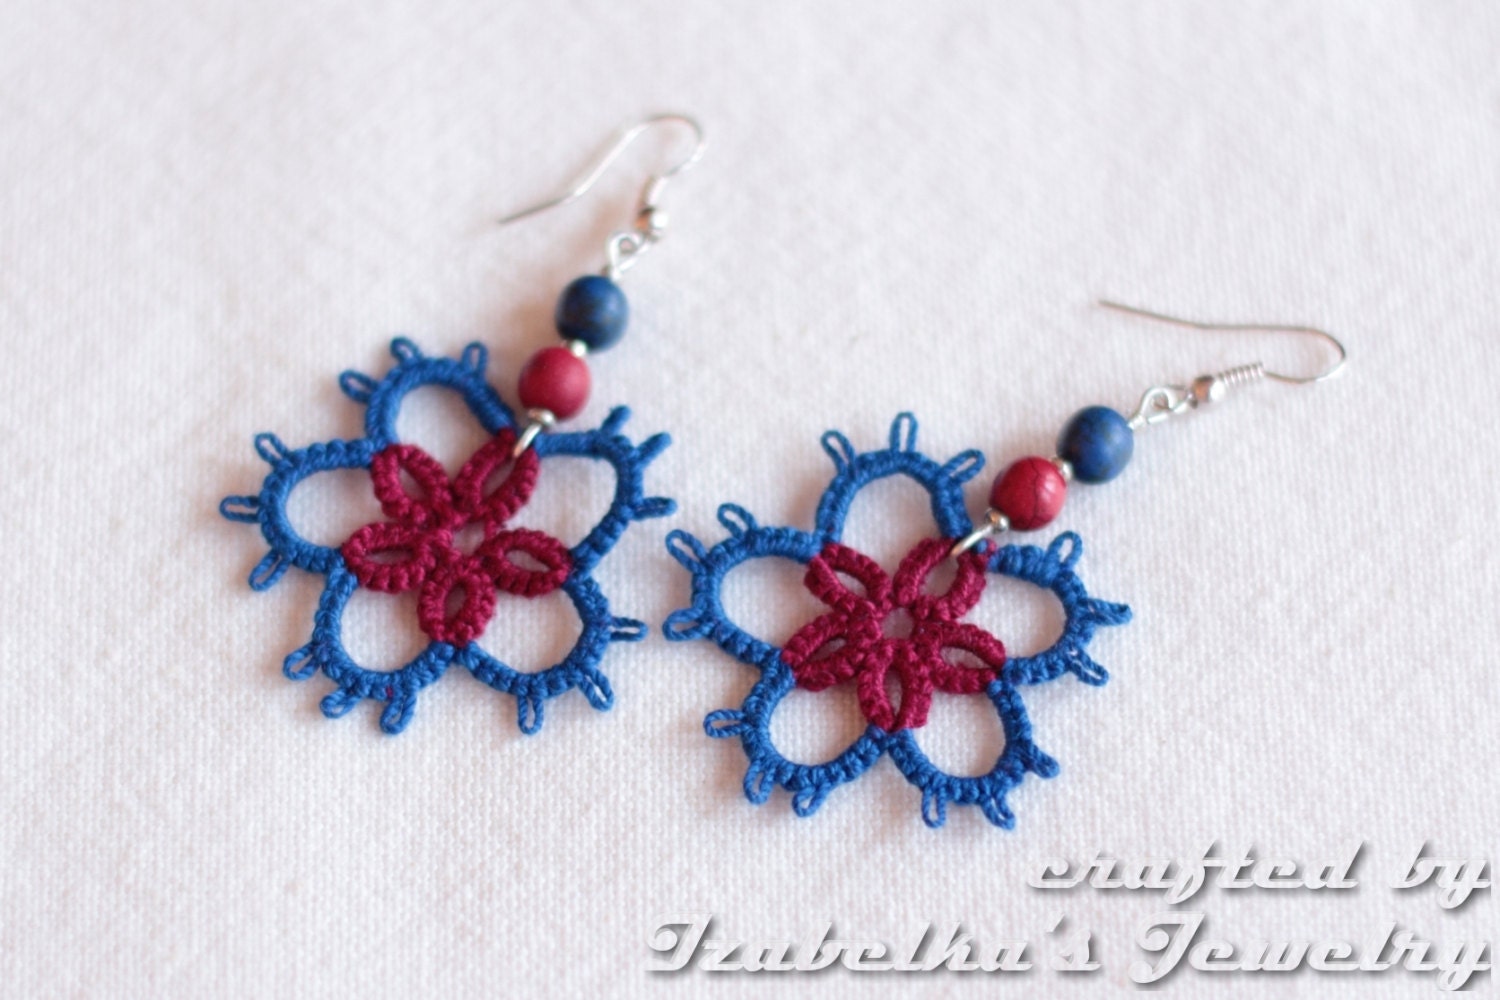 Tatted flower earrings with turquoise beads - IzabelkaG